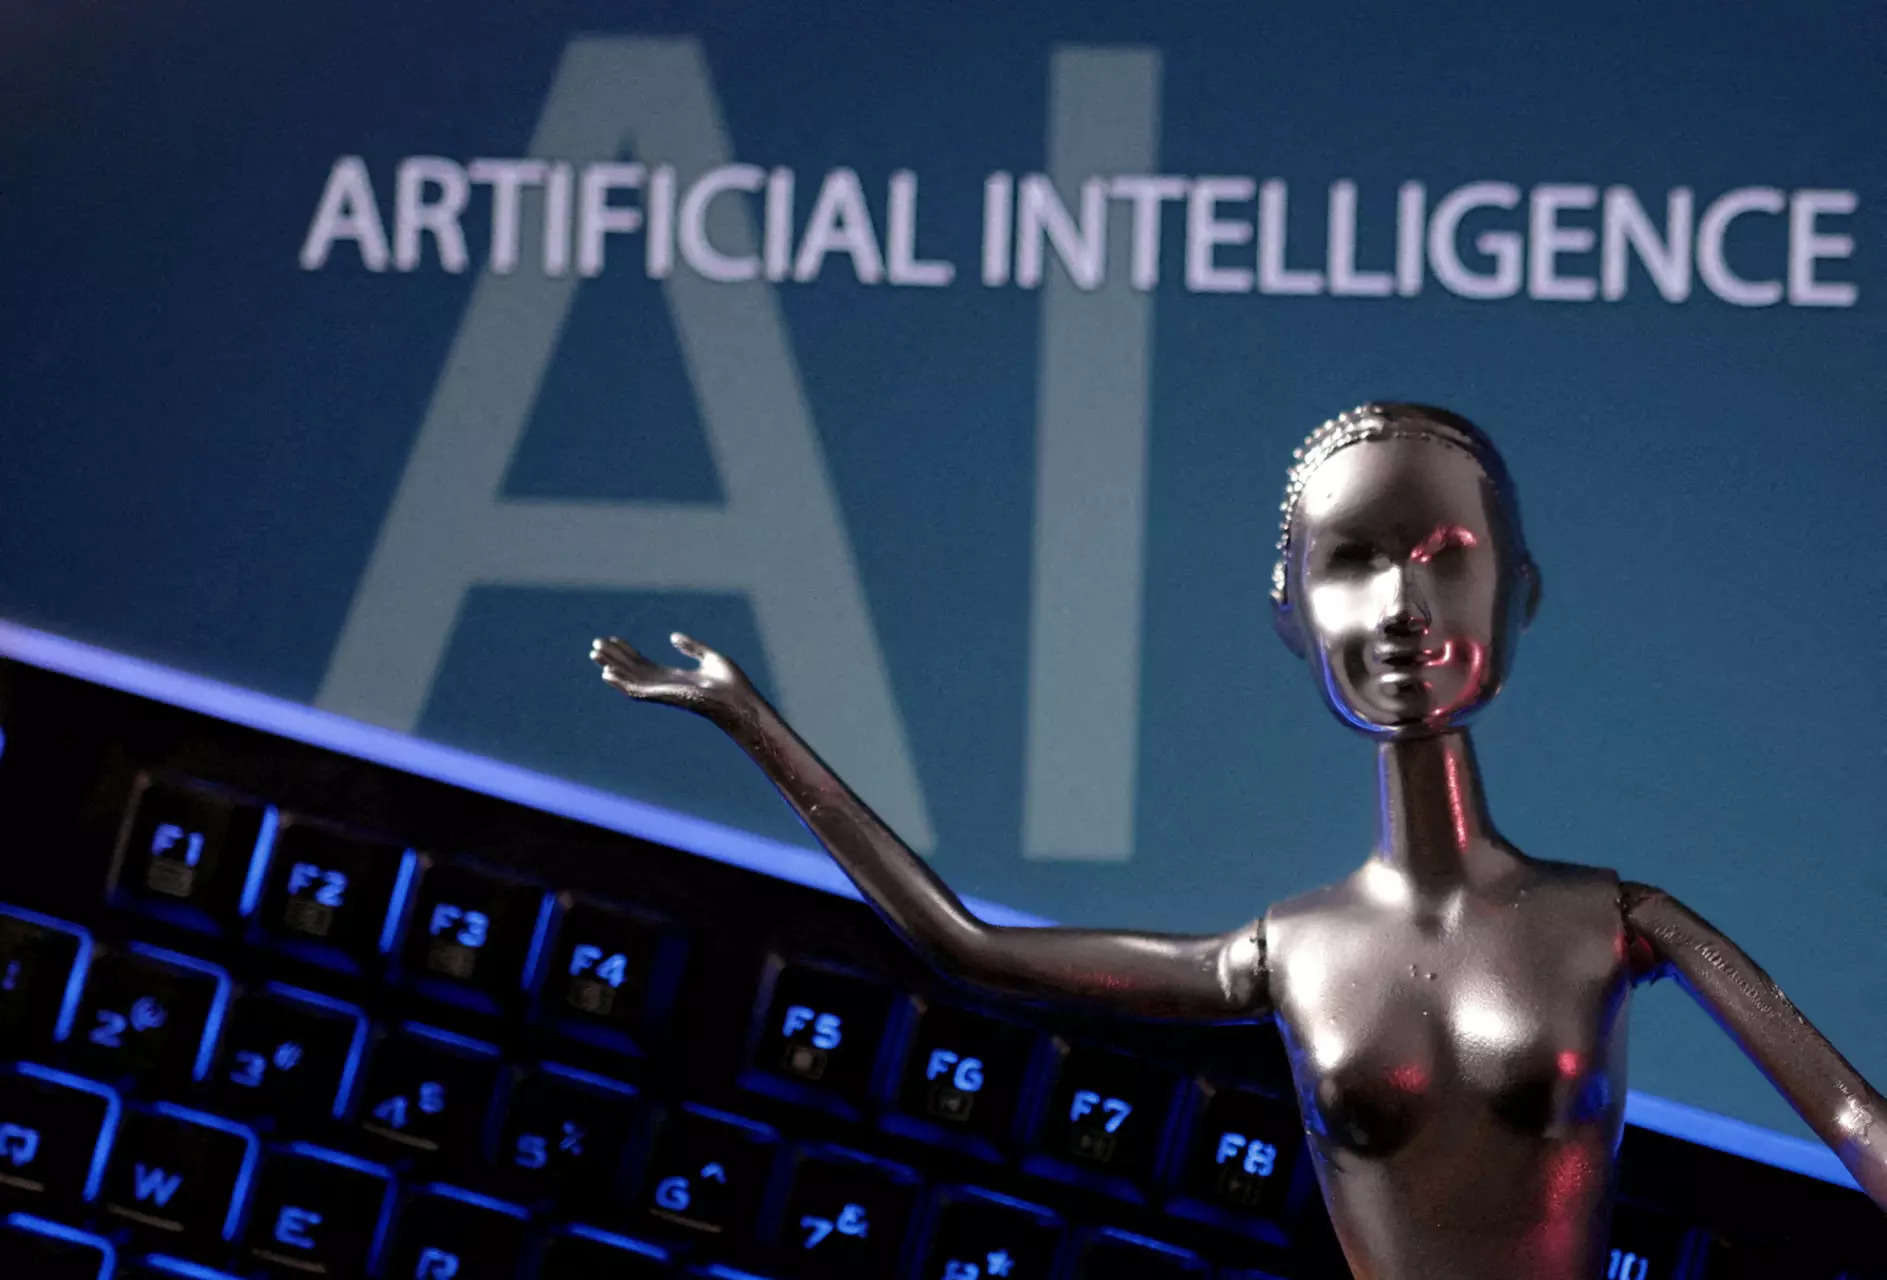 AI systems are already deceiving us and that's a problem, experts warn 